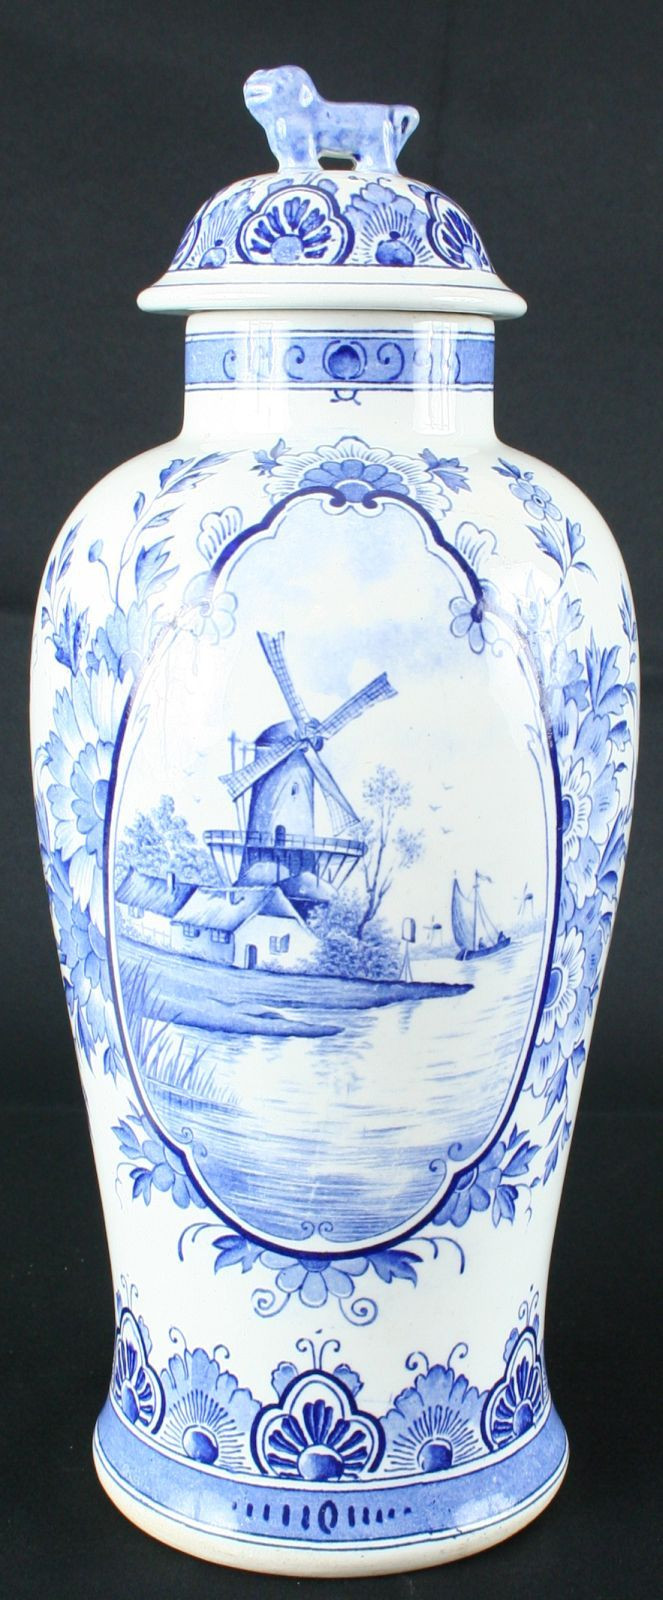 25 Cute Delft Vase Value 2023 free download delft vase value of antique 1900 blue delft ginger jar from holland transferware with regard to ntique 1900 blue delft ginger jar from holland transferware windmills cottage